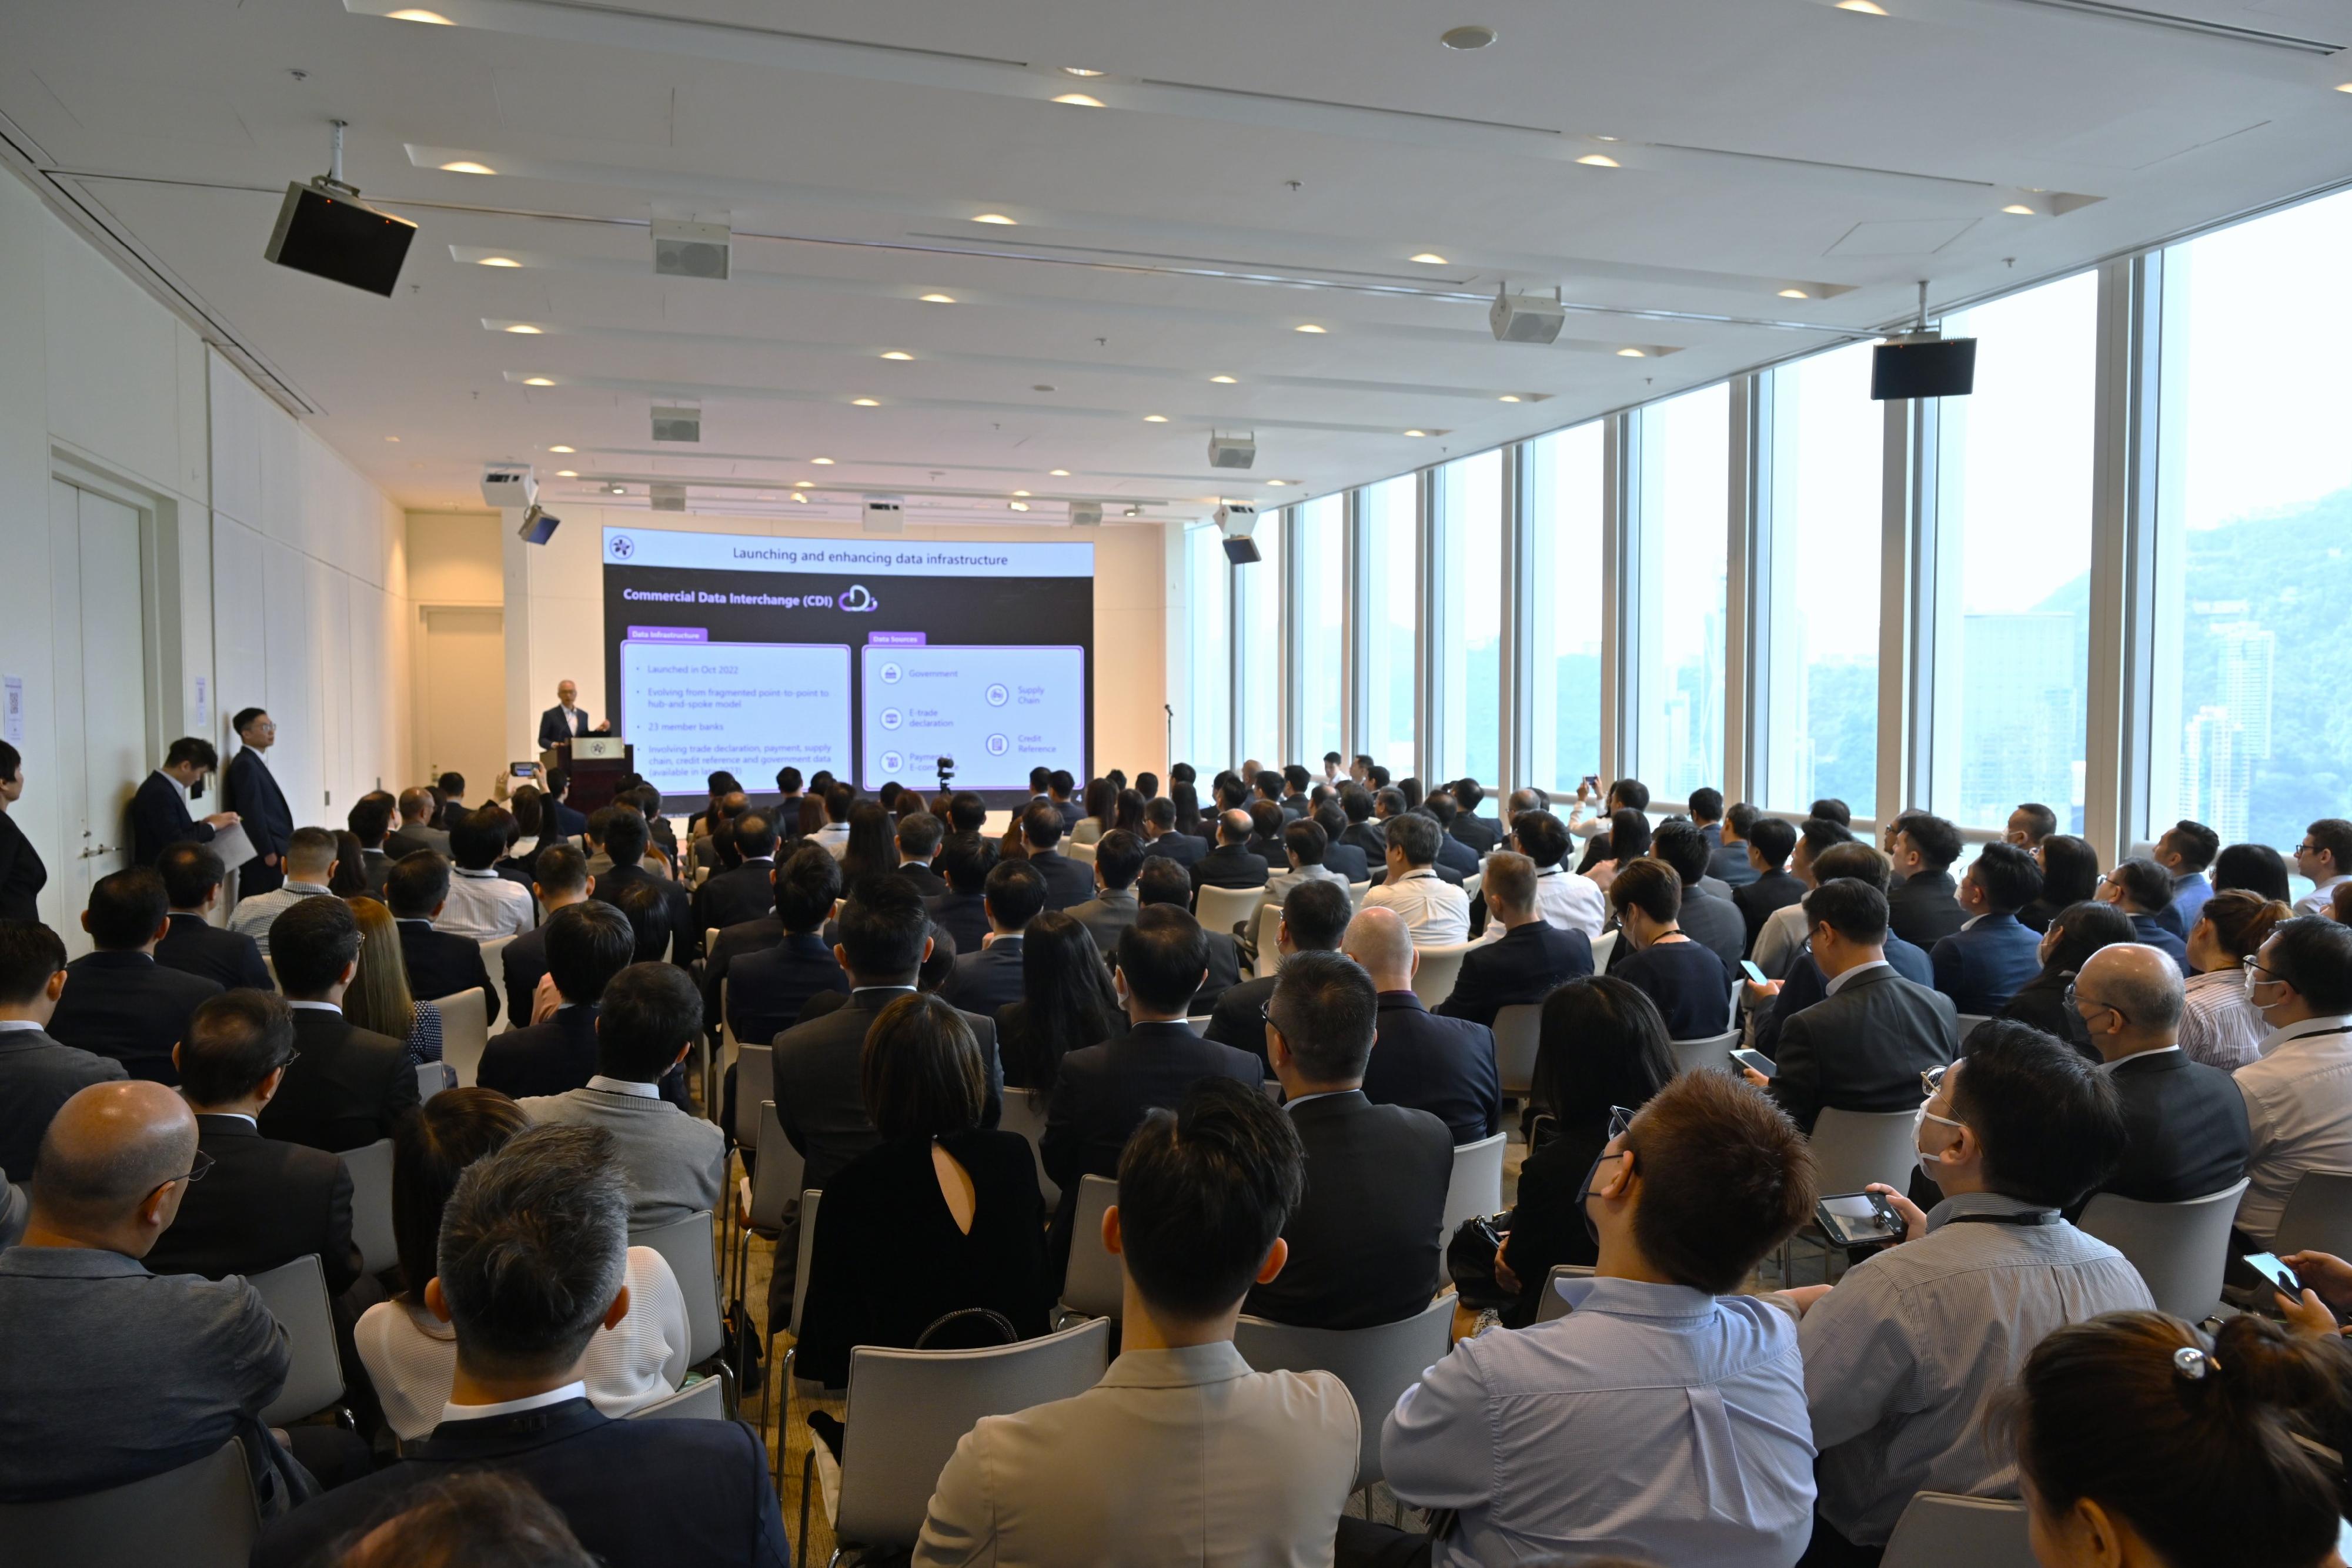 The Hong Kong Monetary Authority today (May 4) hosted its first Data Summit attracting over 260 senior representatives from more than 60 banks, data analytics service providers and data providers.
